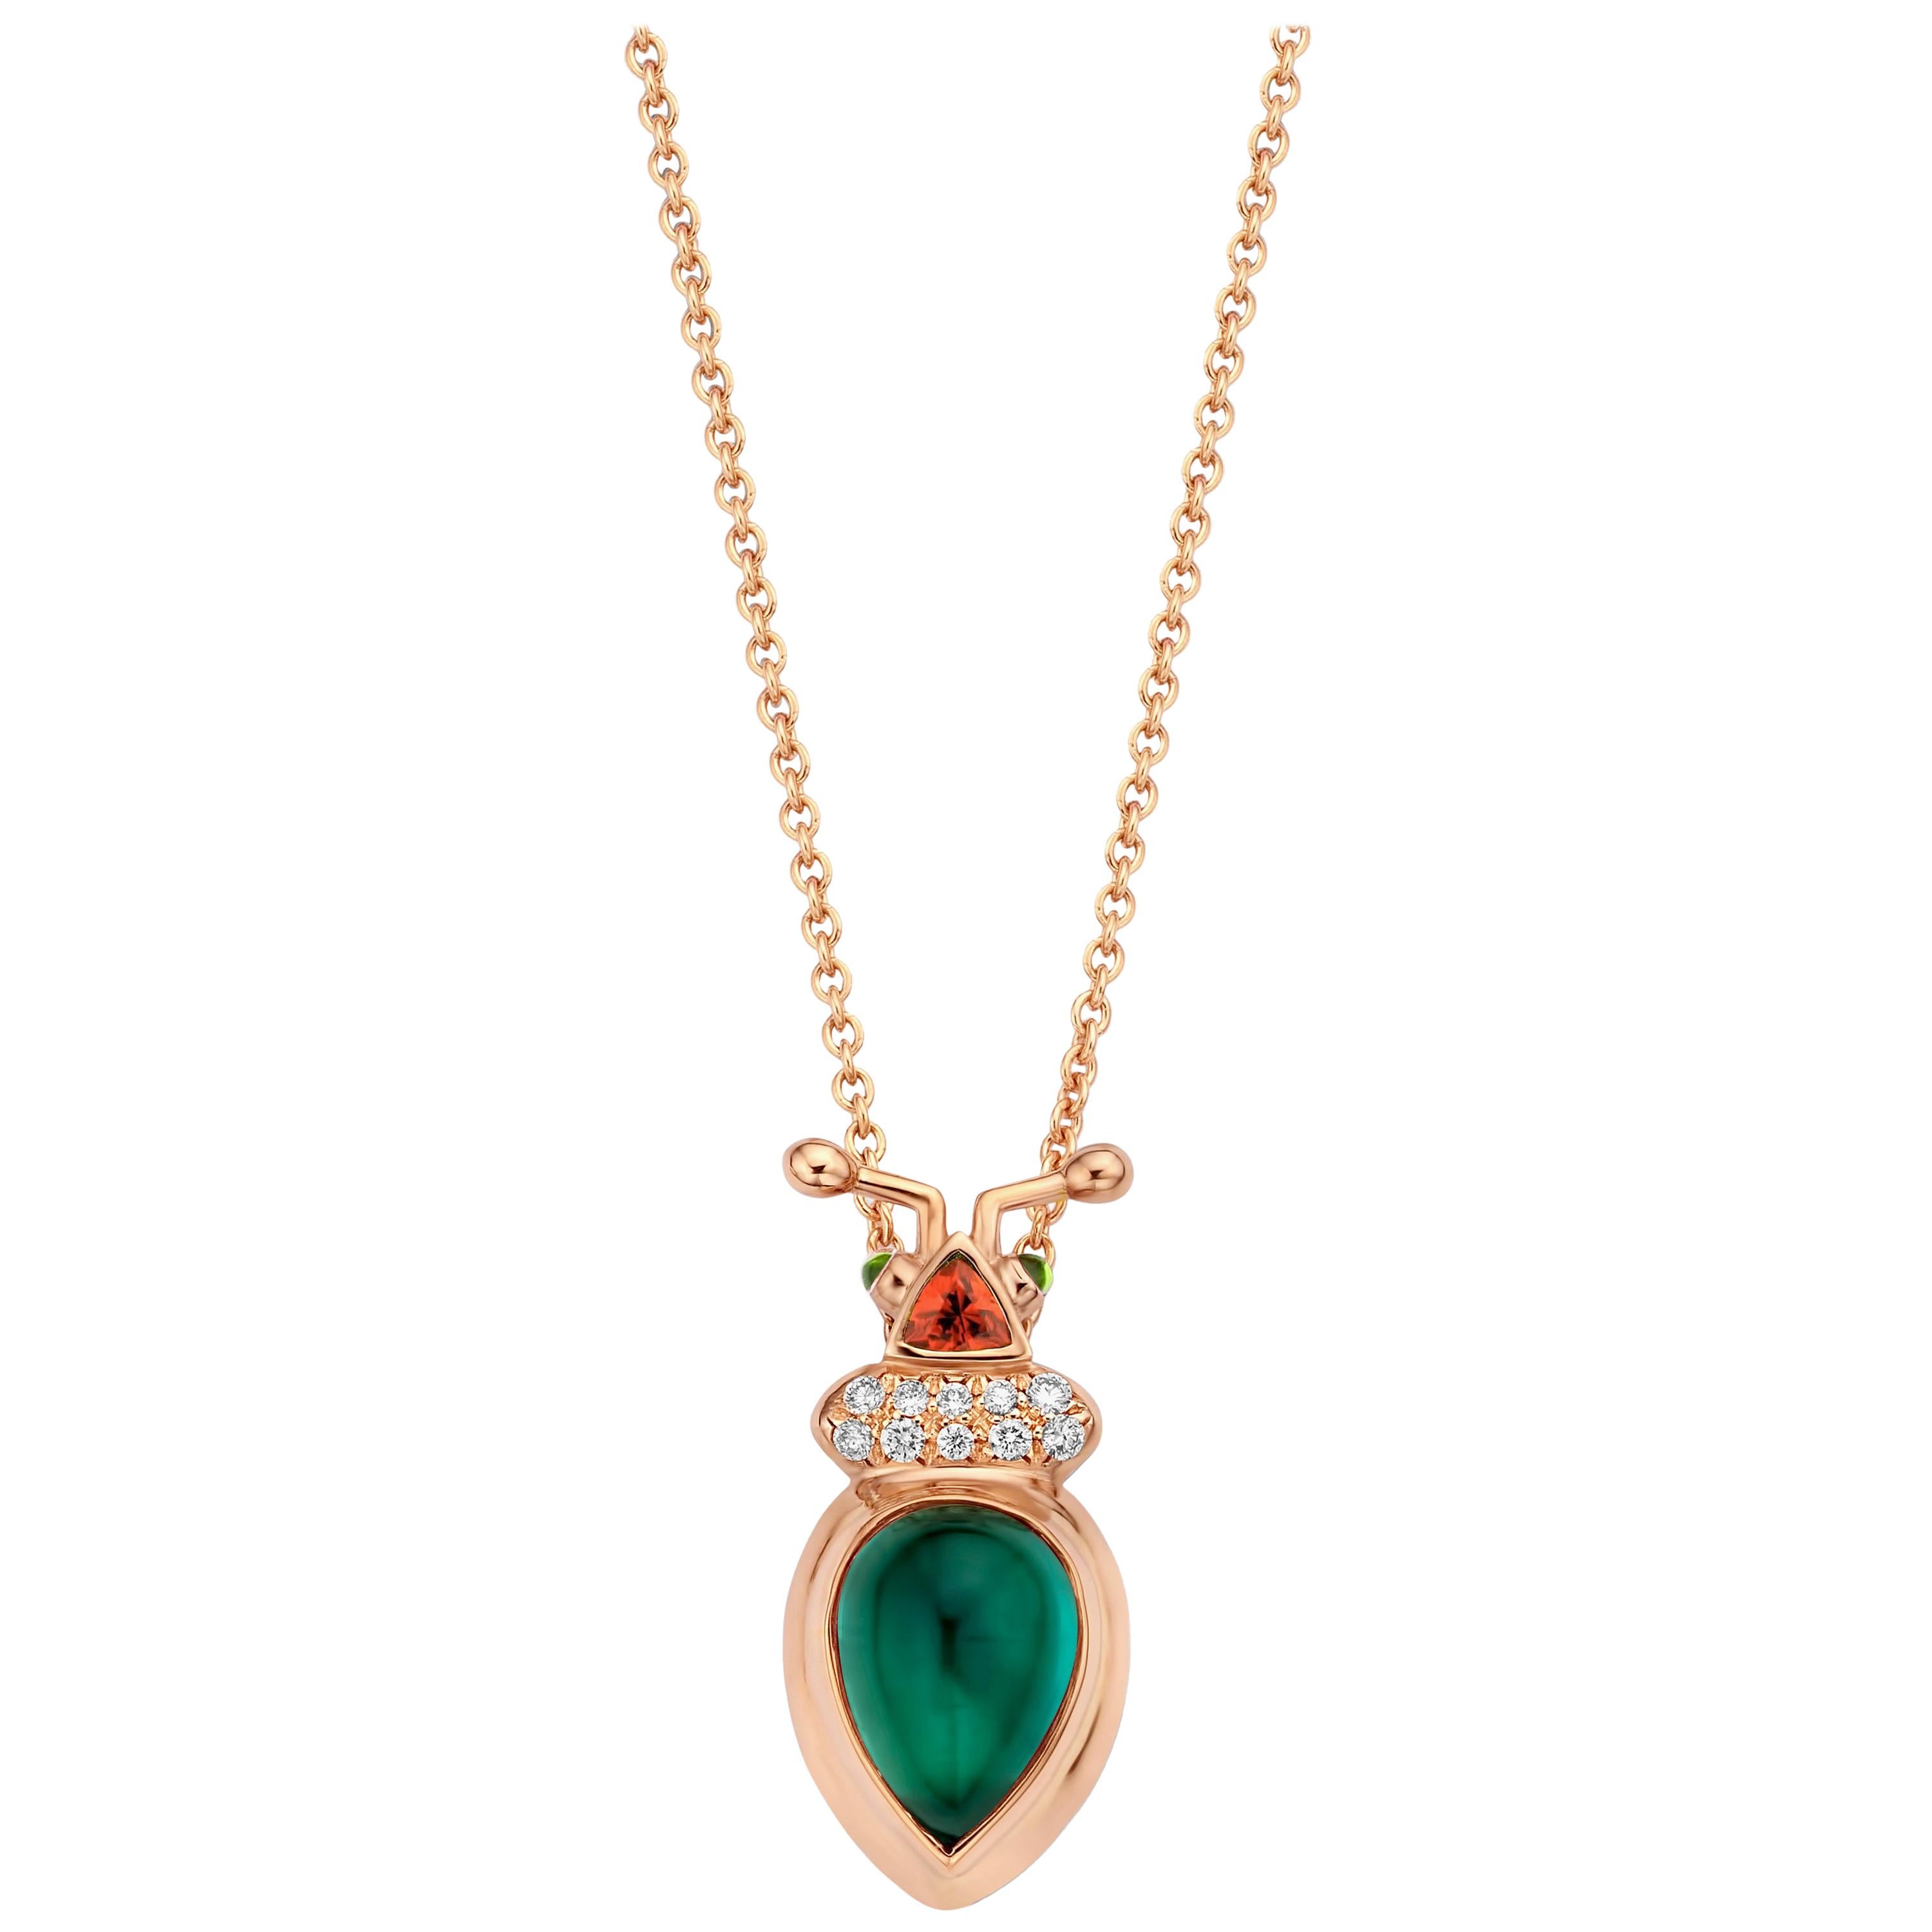 One of a kind lucky beetle necklace in 18K rose gold 10g set with the finest diamonds in brilliant cut 0,09Ct (VVS/DEF quality) and one natural, green tourmaline in pear cabochon cut 2,03Ct. The head is set with a tsavorite in trillion cut and the